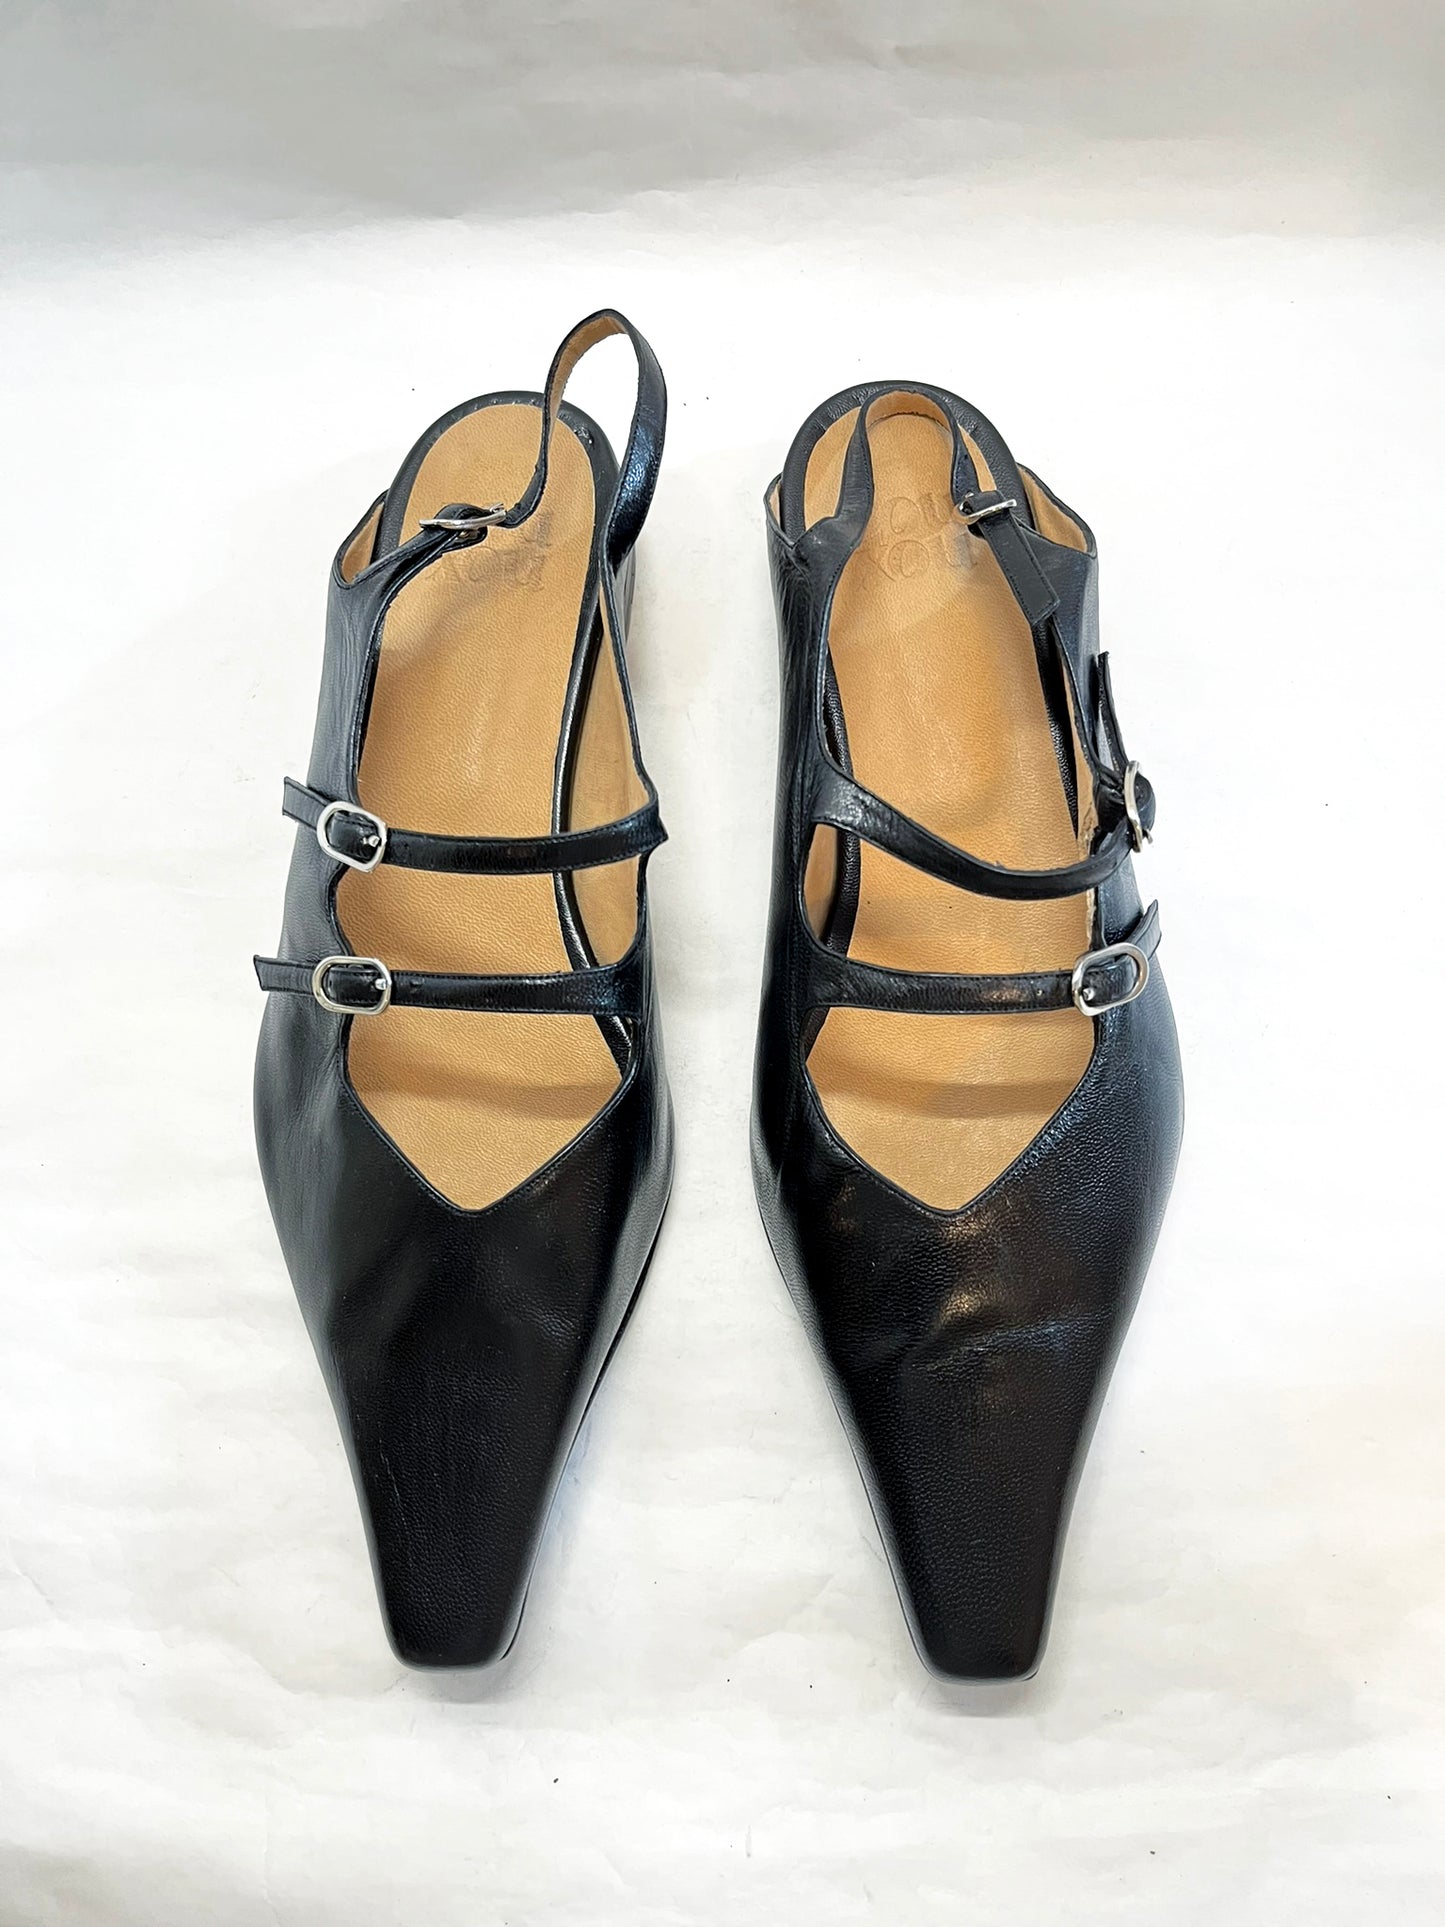 Cata Buckle Flat in Black Size 42